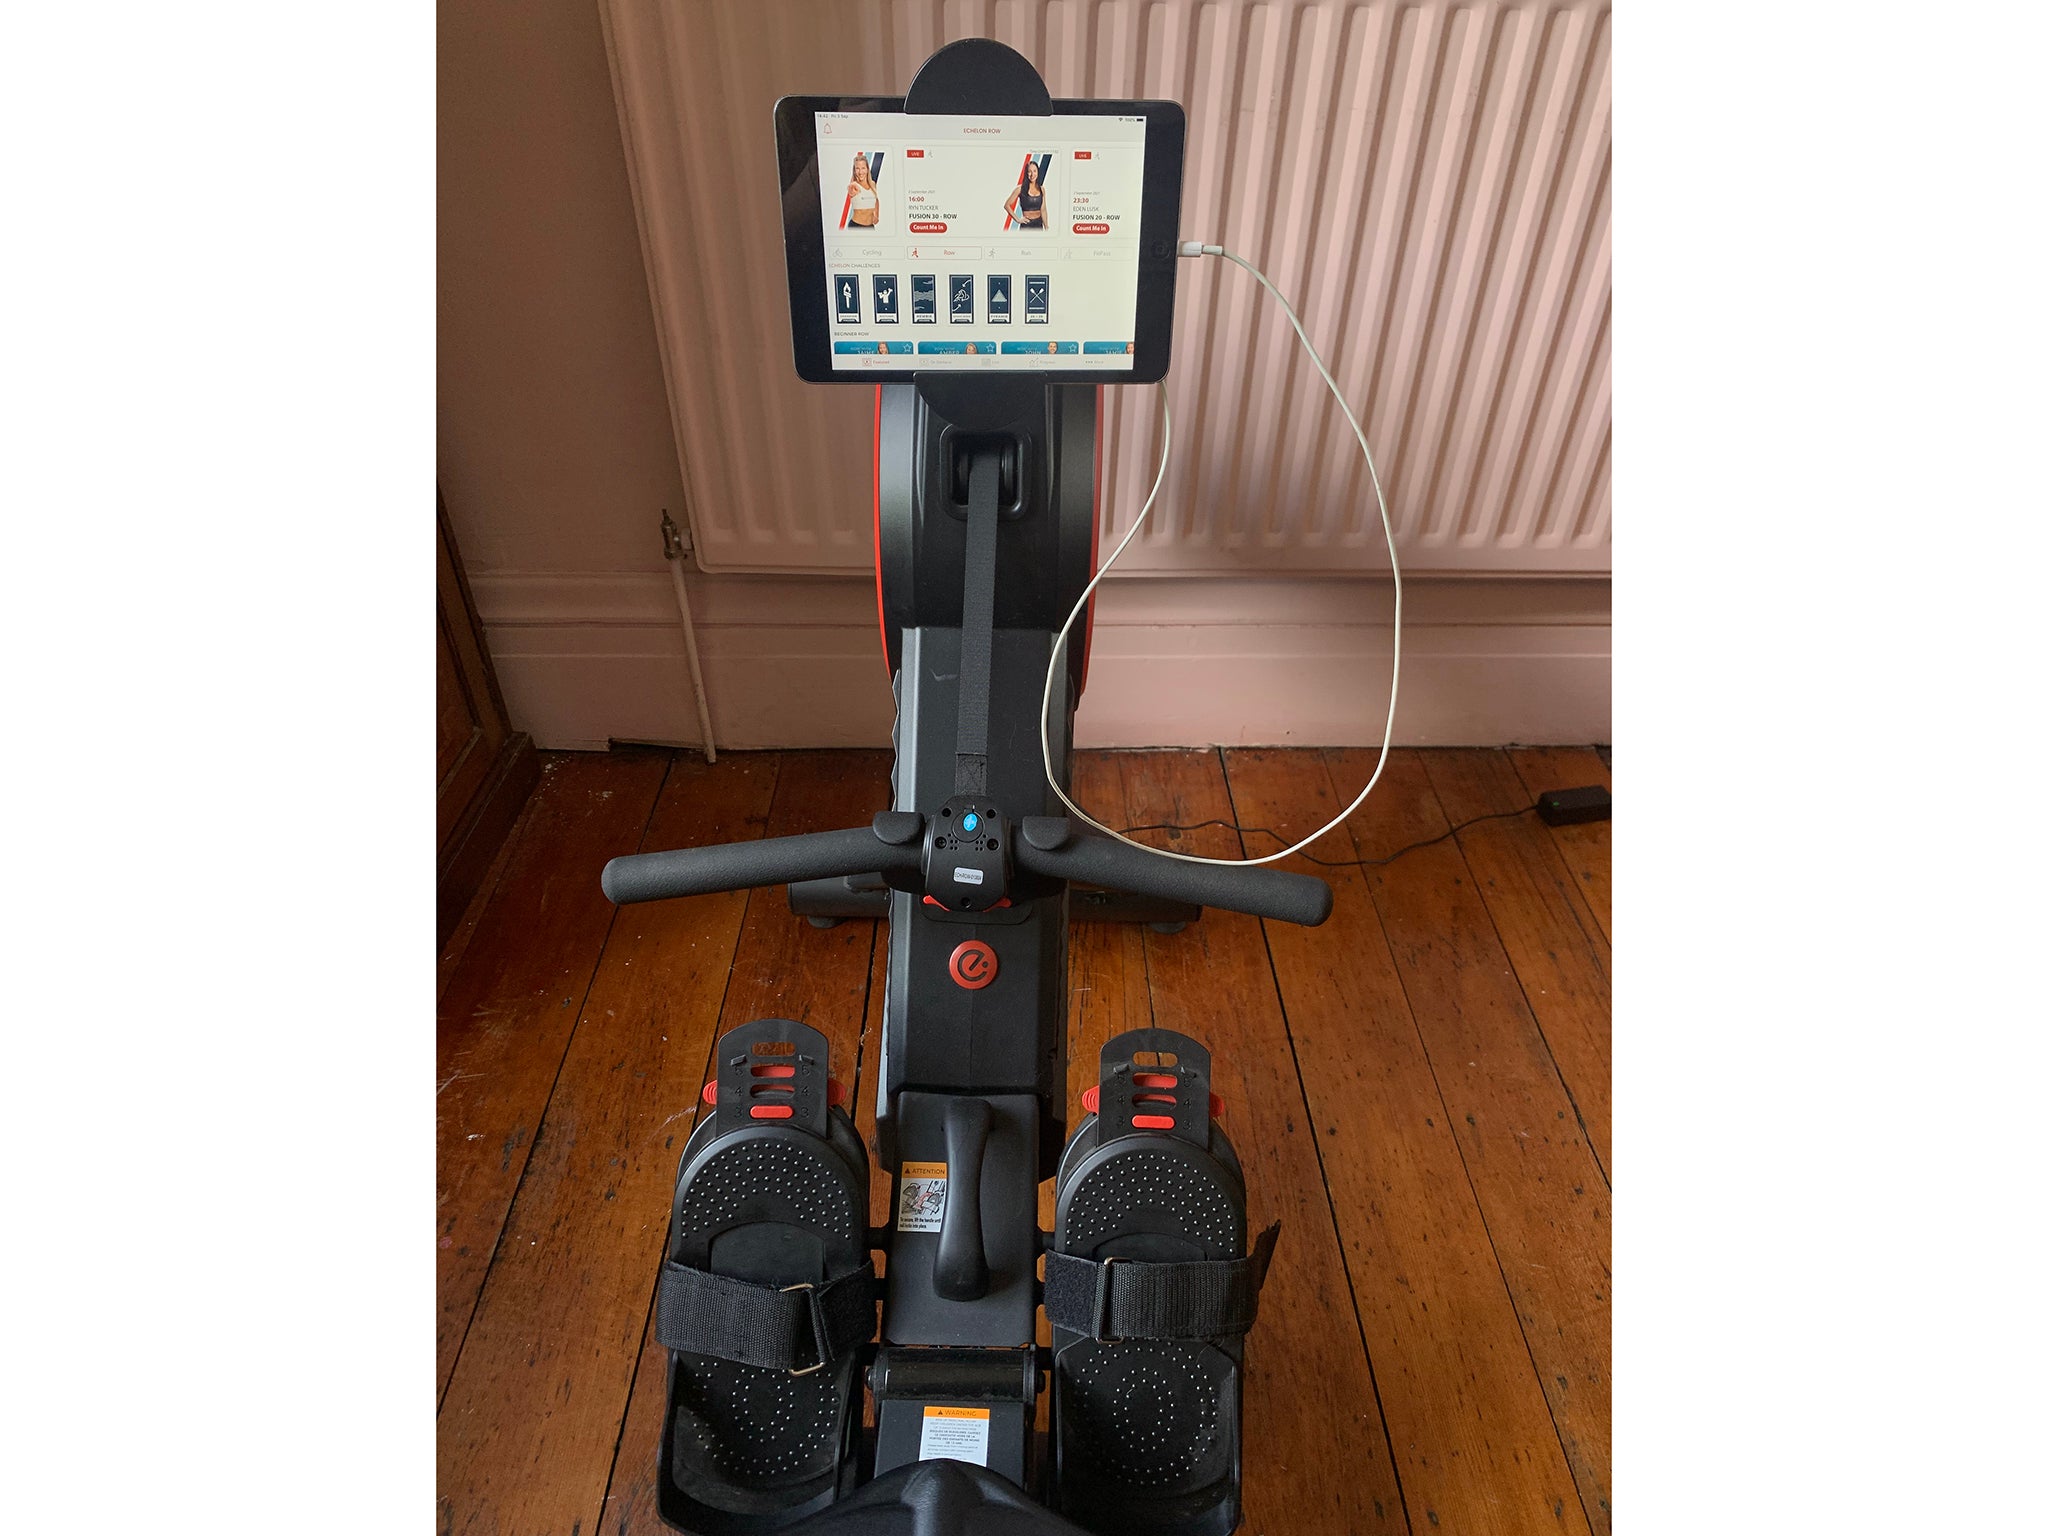 You can easily connect your tablet to the rower